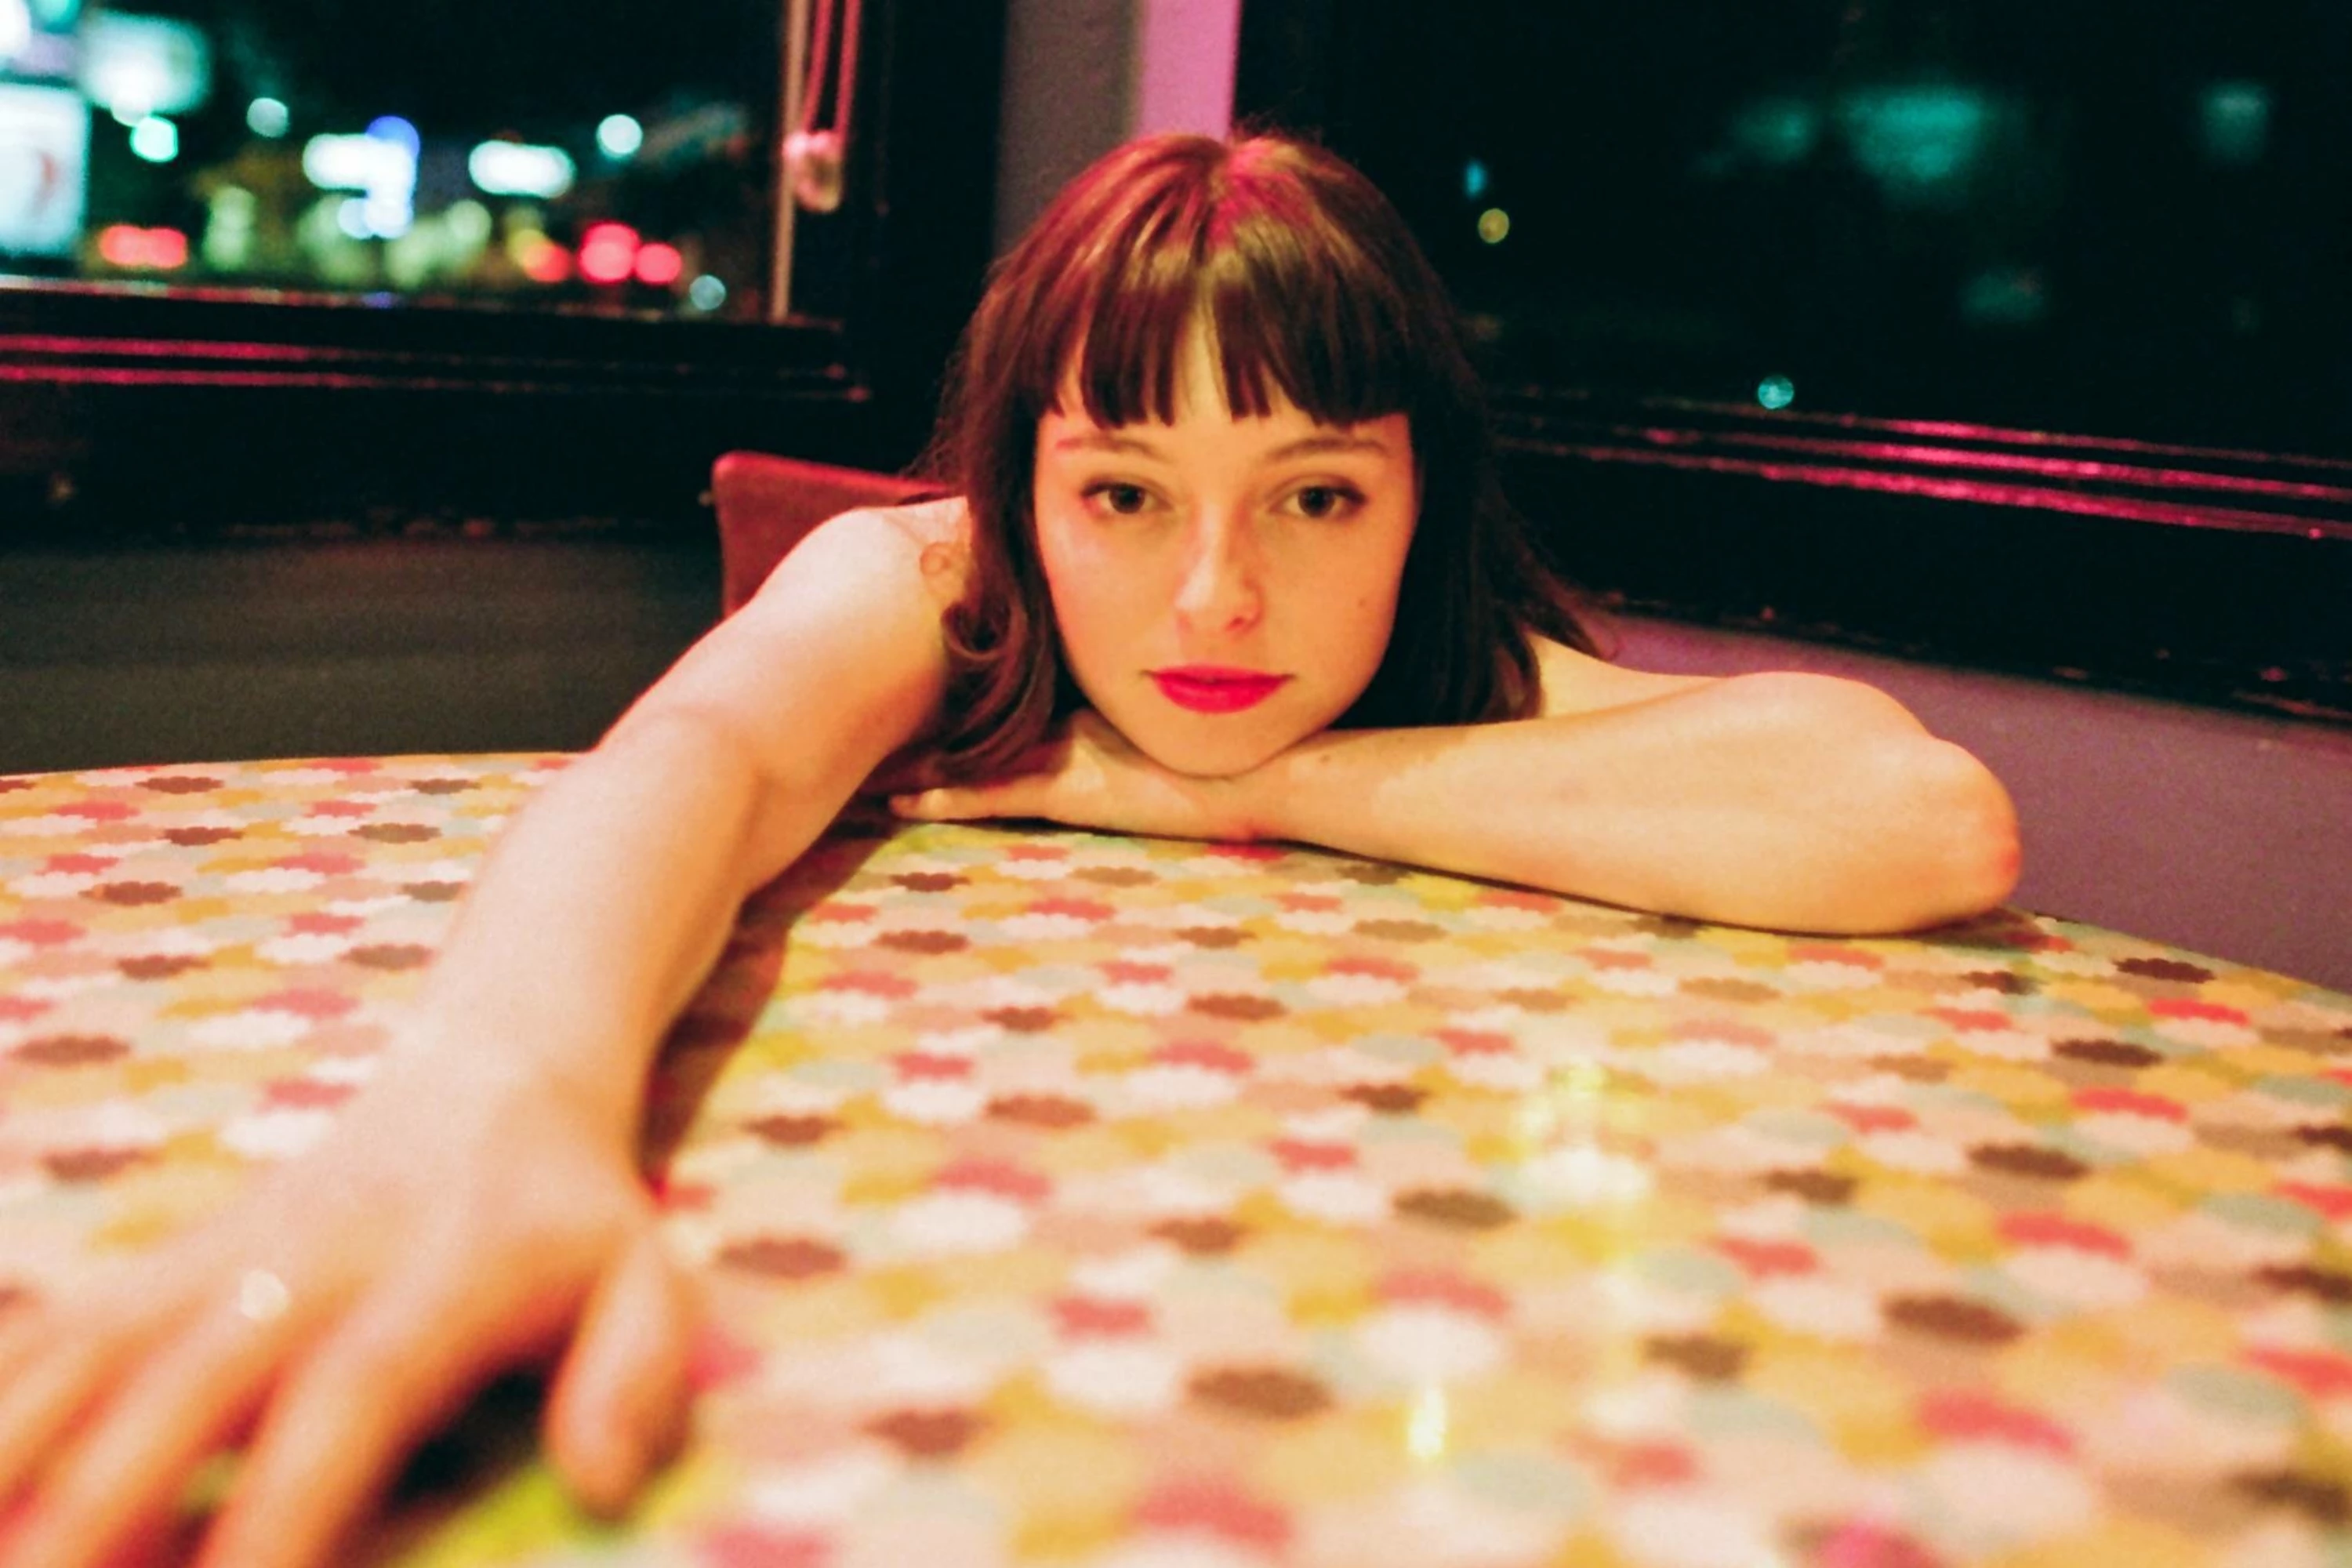 The world according to Stella Donnelly